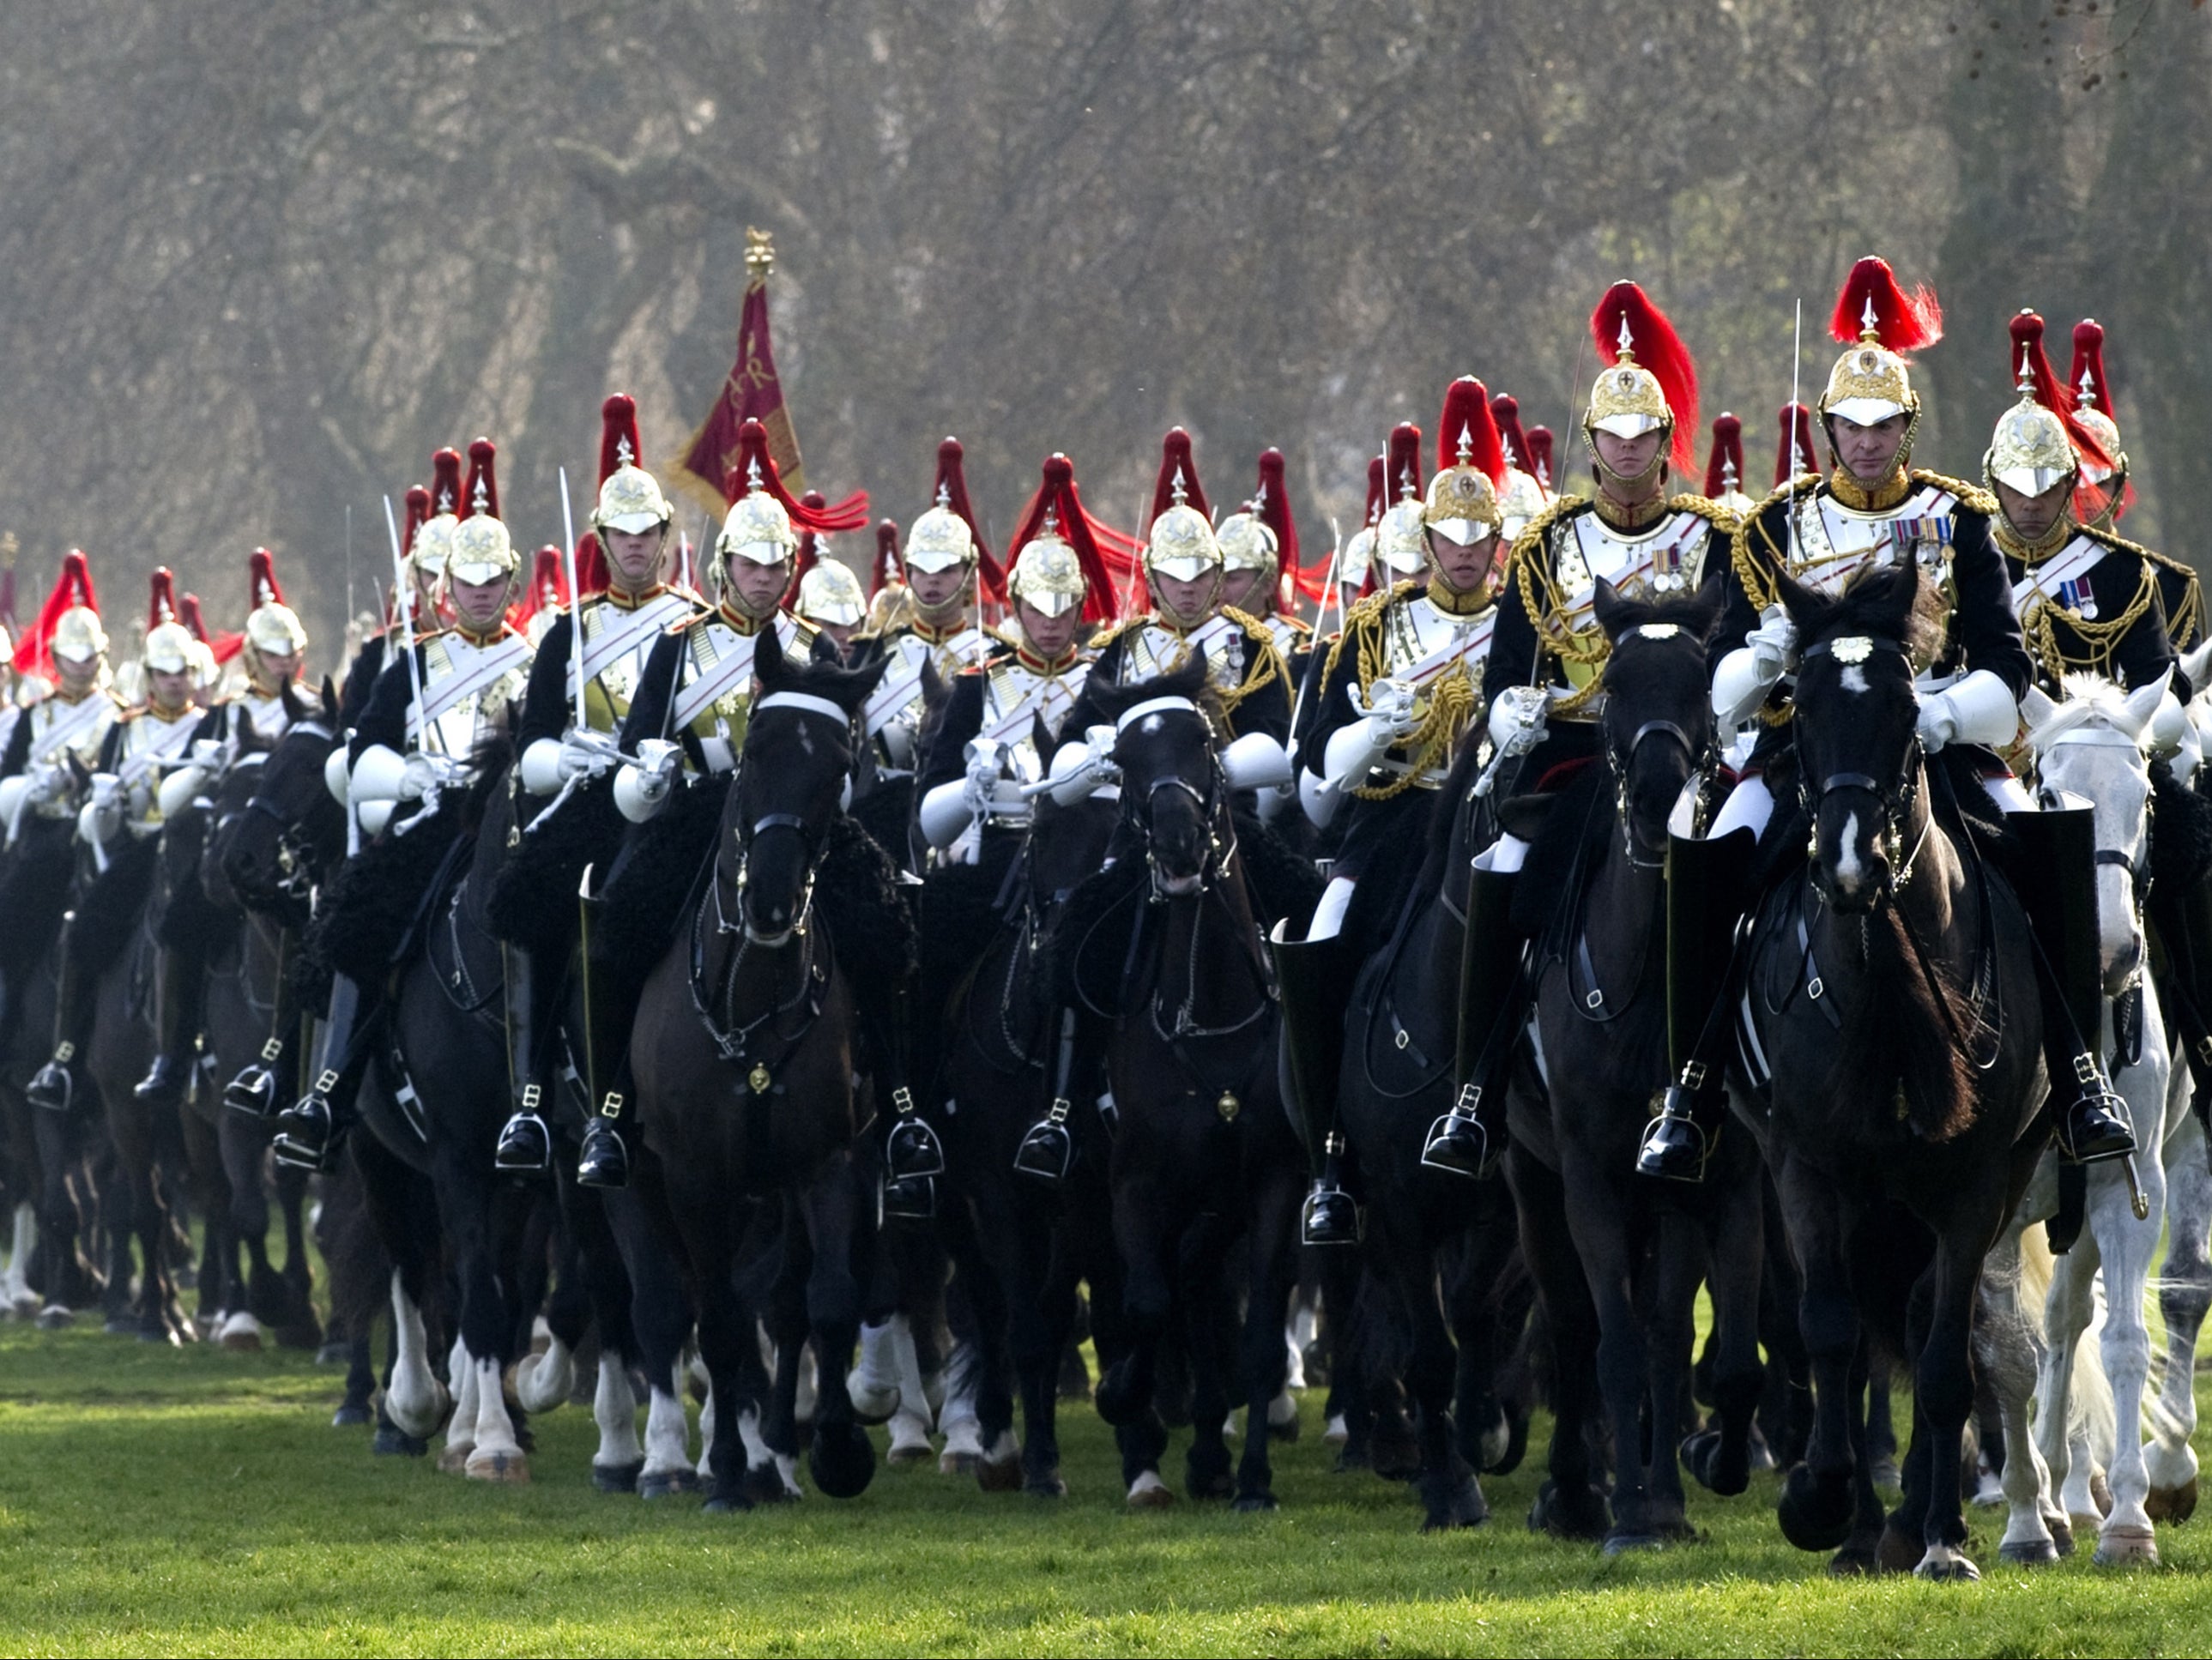 L Cpl Robinson said he suffered intimidation while serving with the Household Cavalry Mounted Regiment